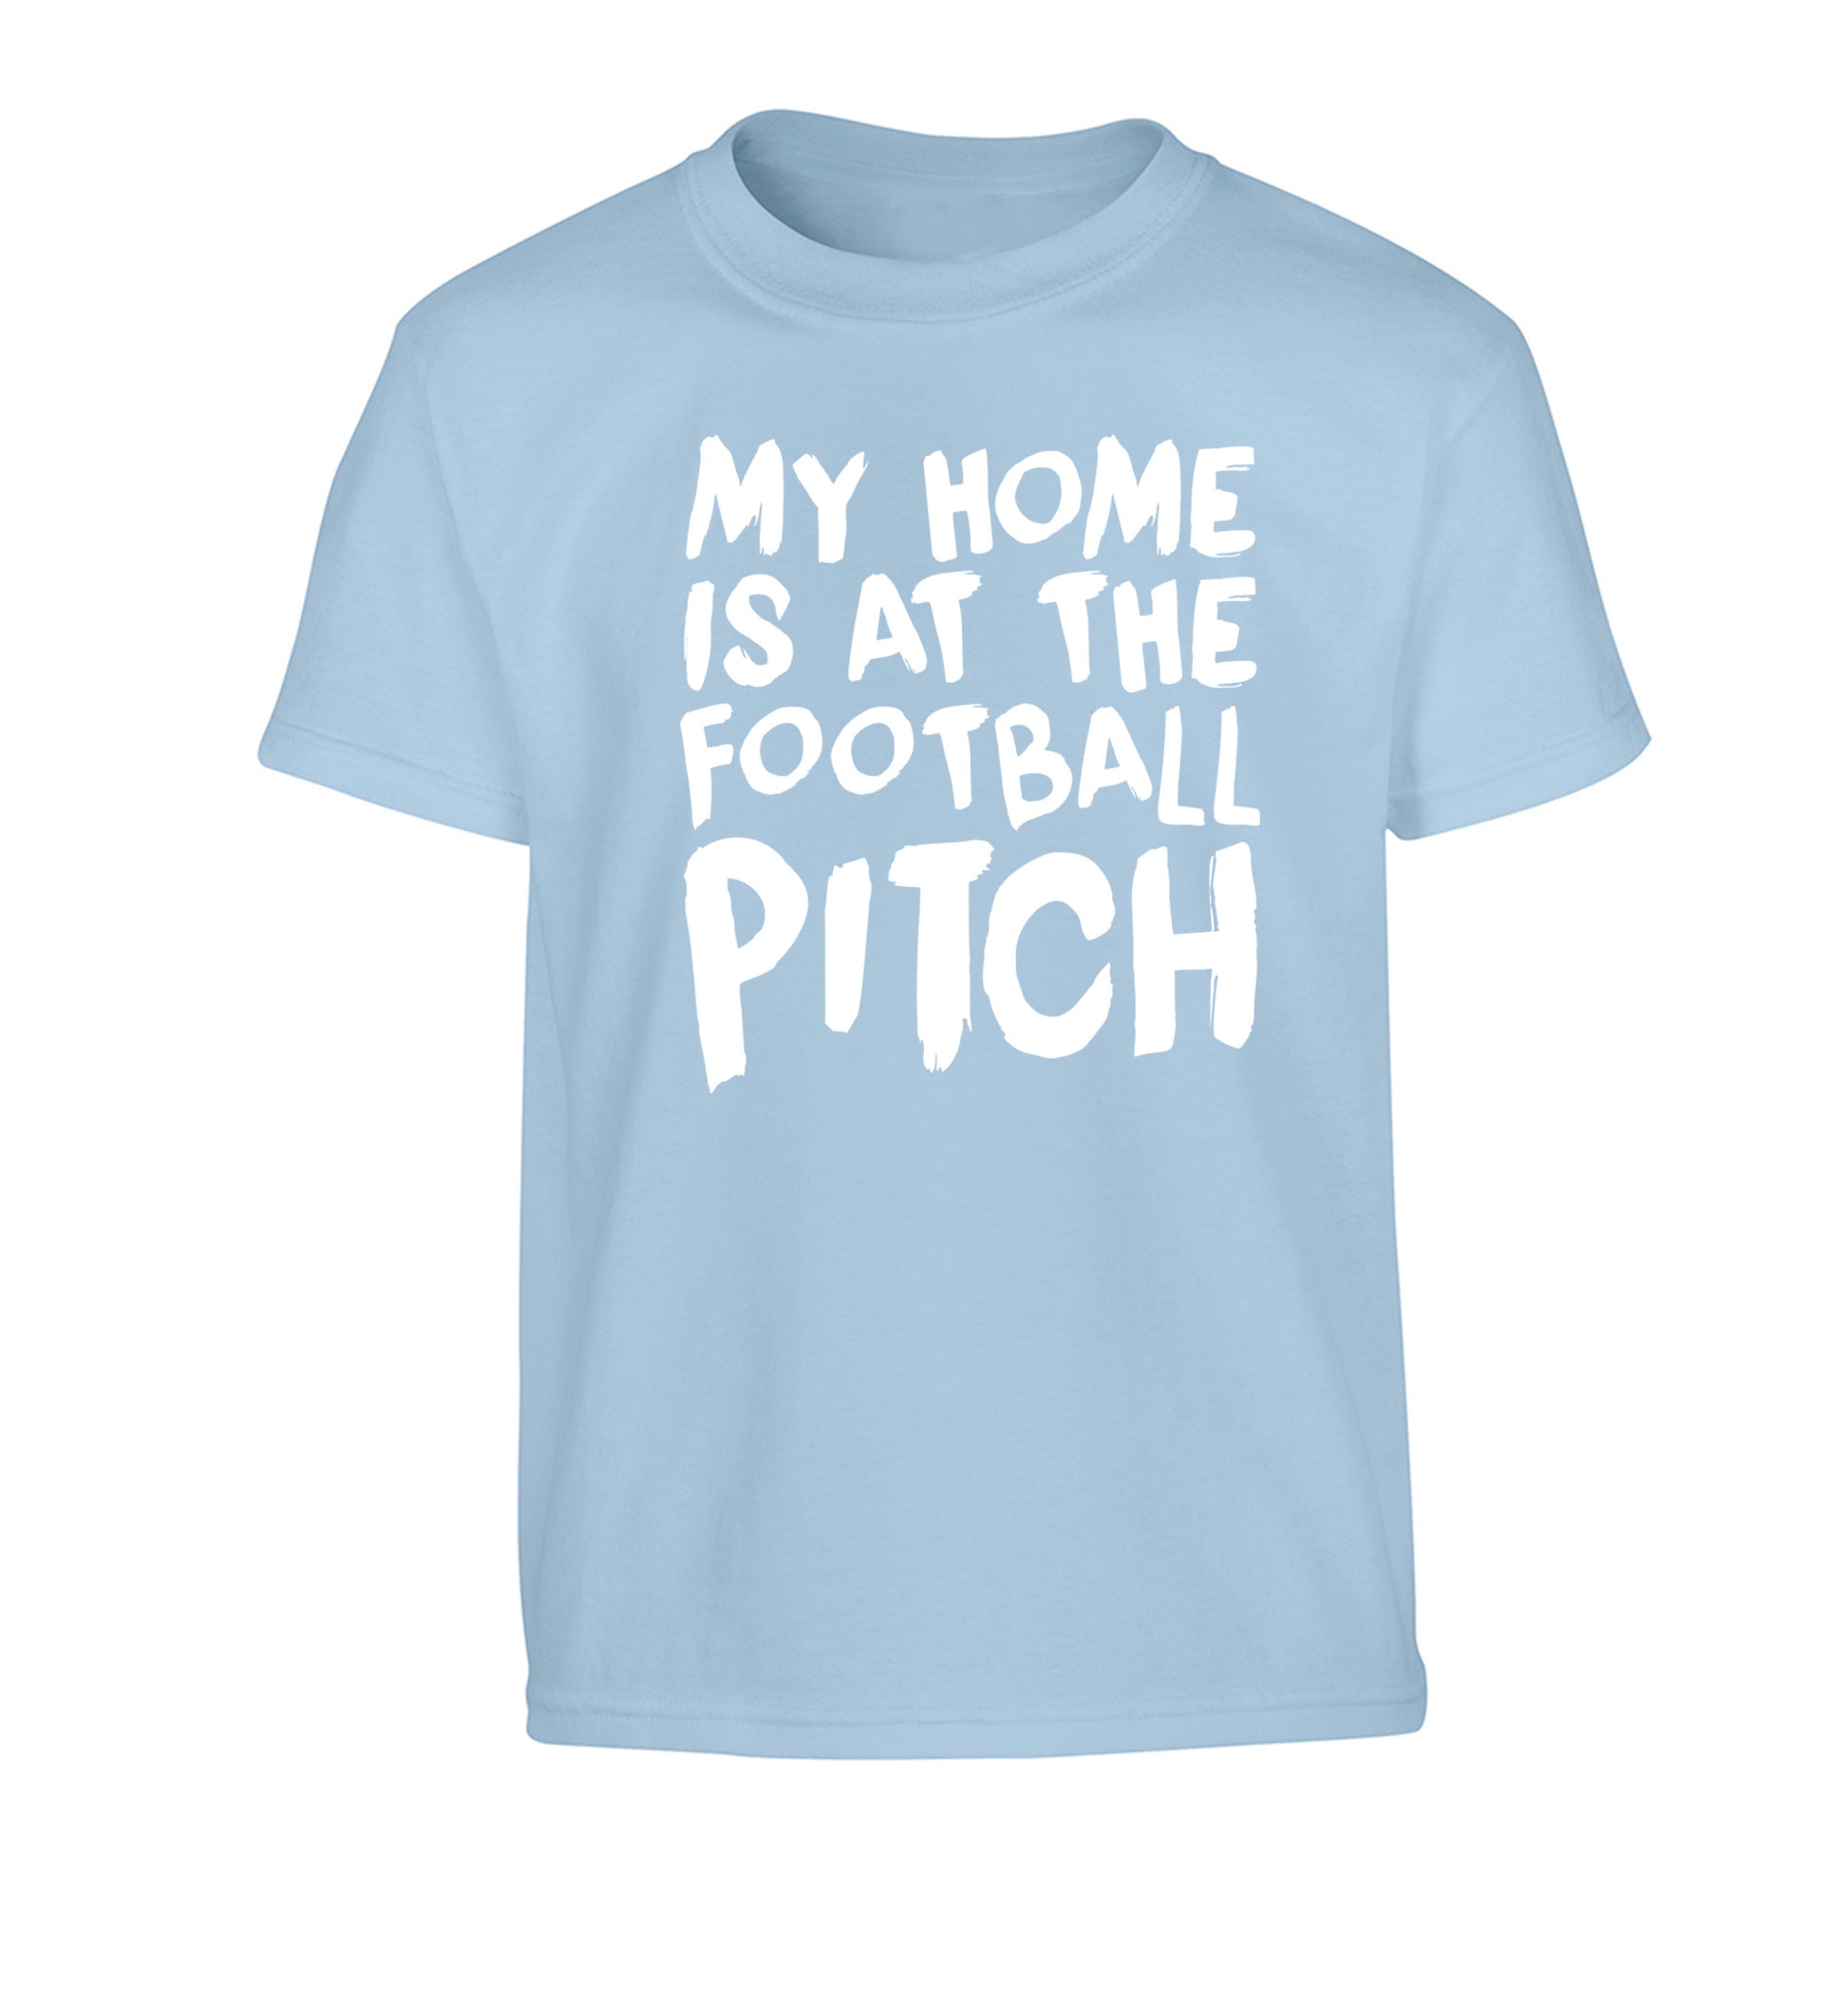 My home is at the football pitch Children's light blue Tshirt 12-14 Years